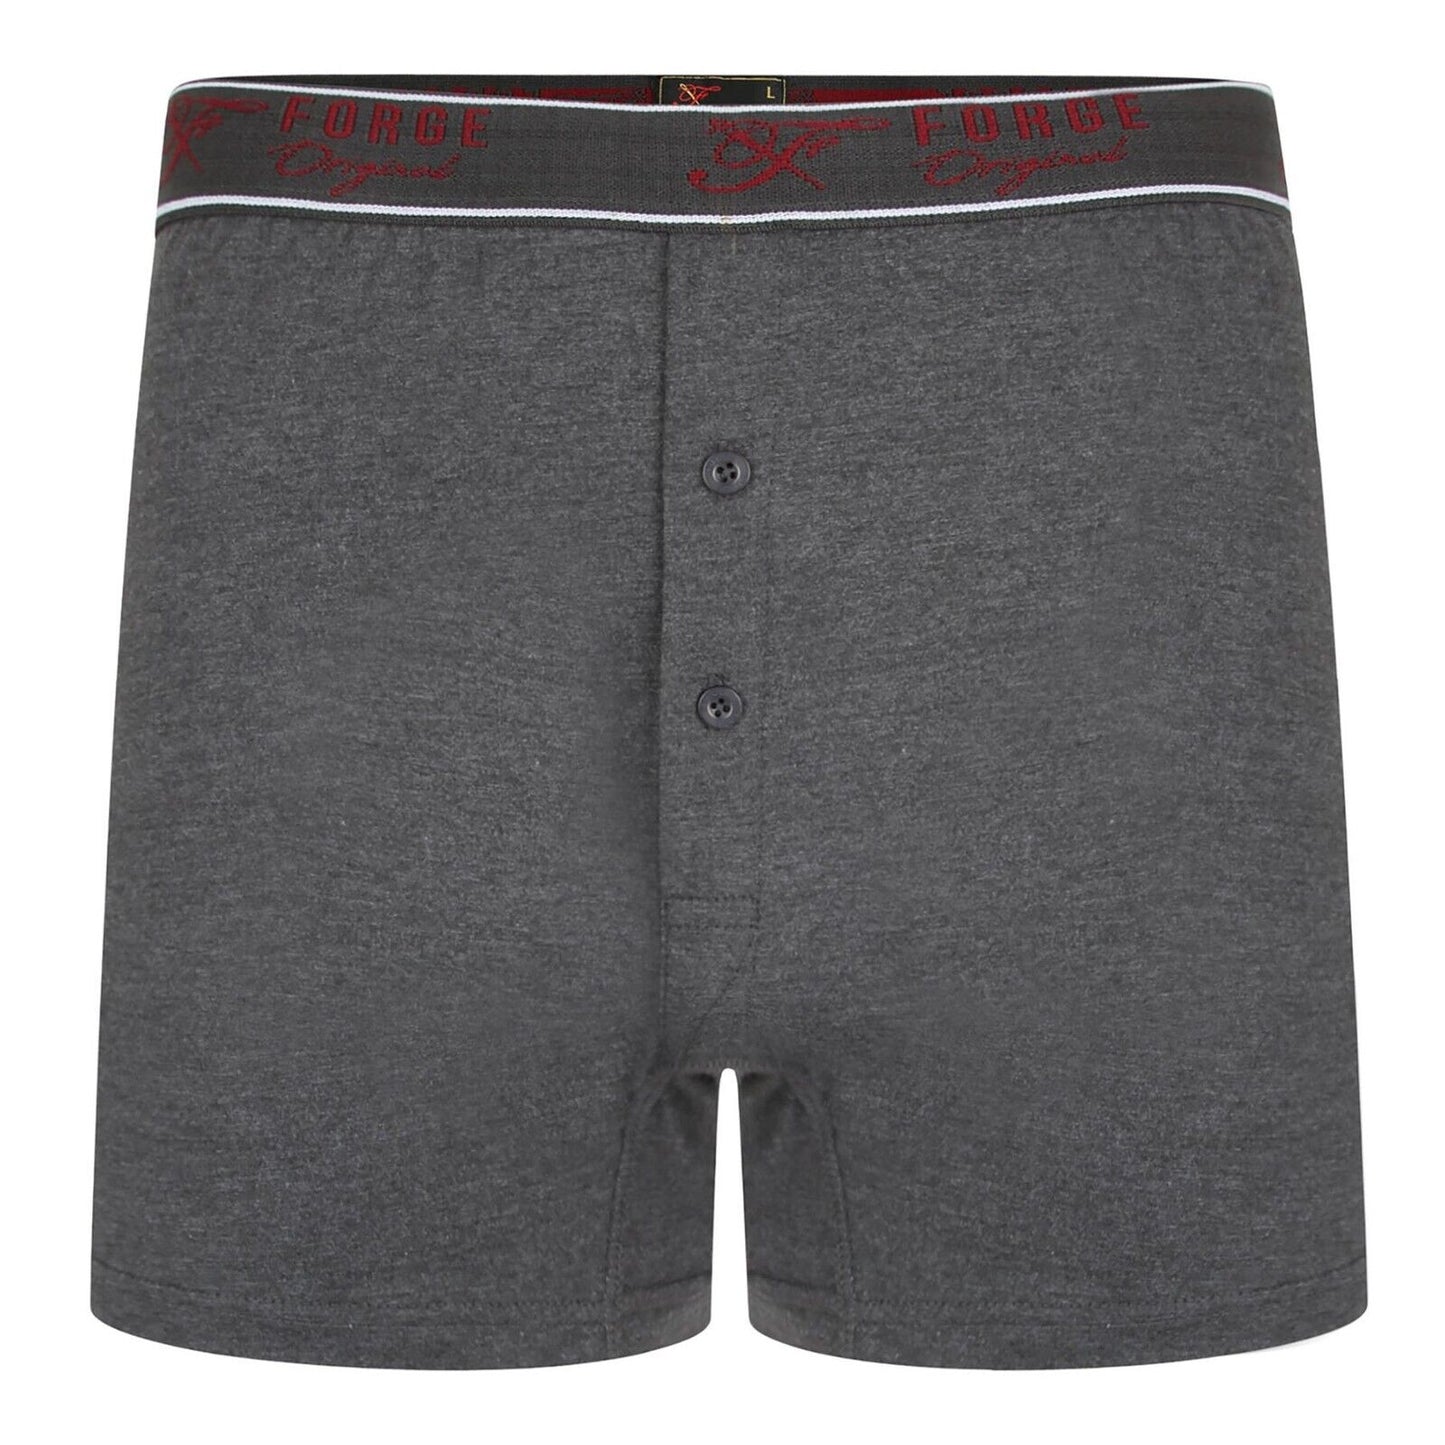 Mens 3 Pack Forge Boxer Shorts Trunks Cotton Underwear Button Fly Underpants